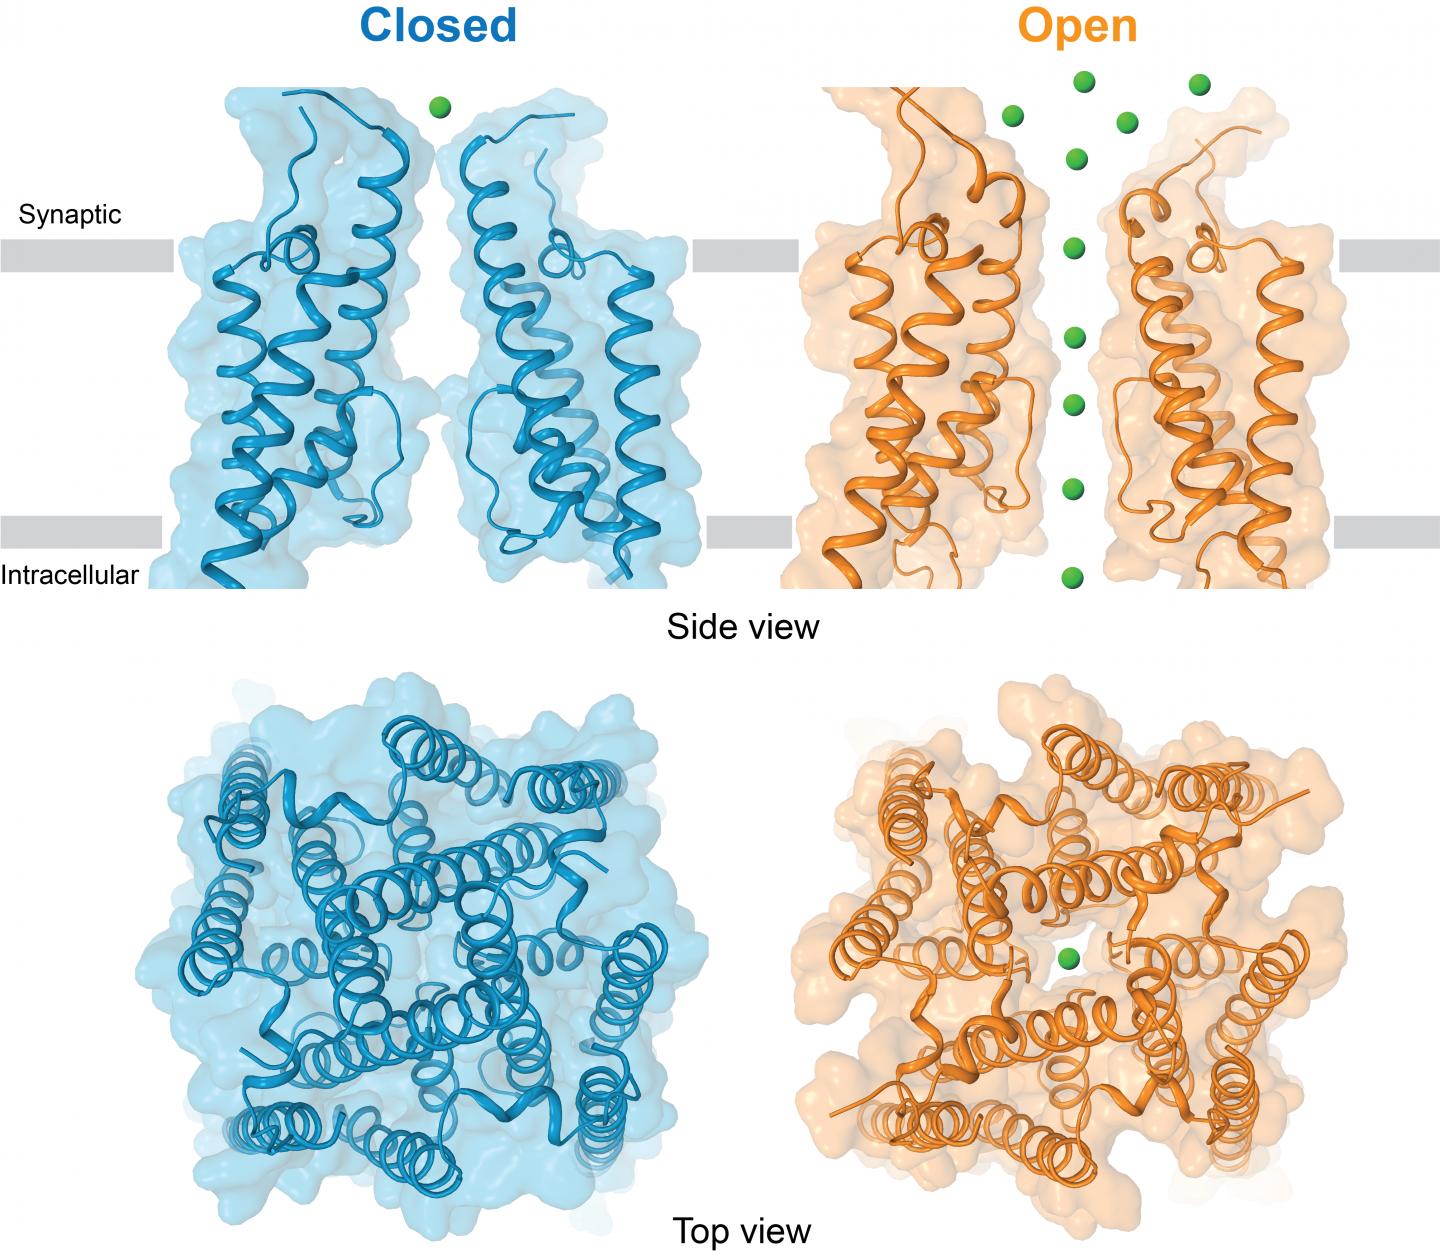 Structures of the Ion Channel of the Glutamate Receptor